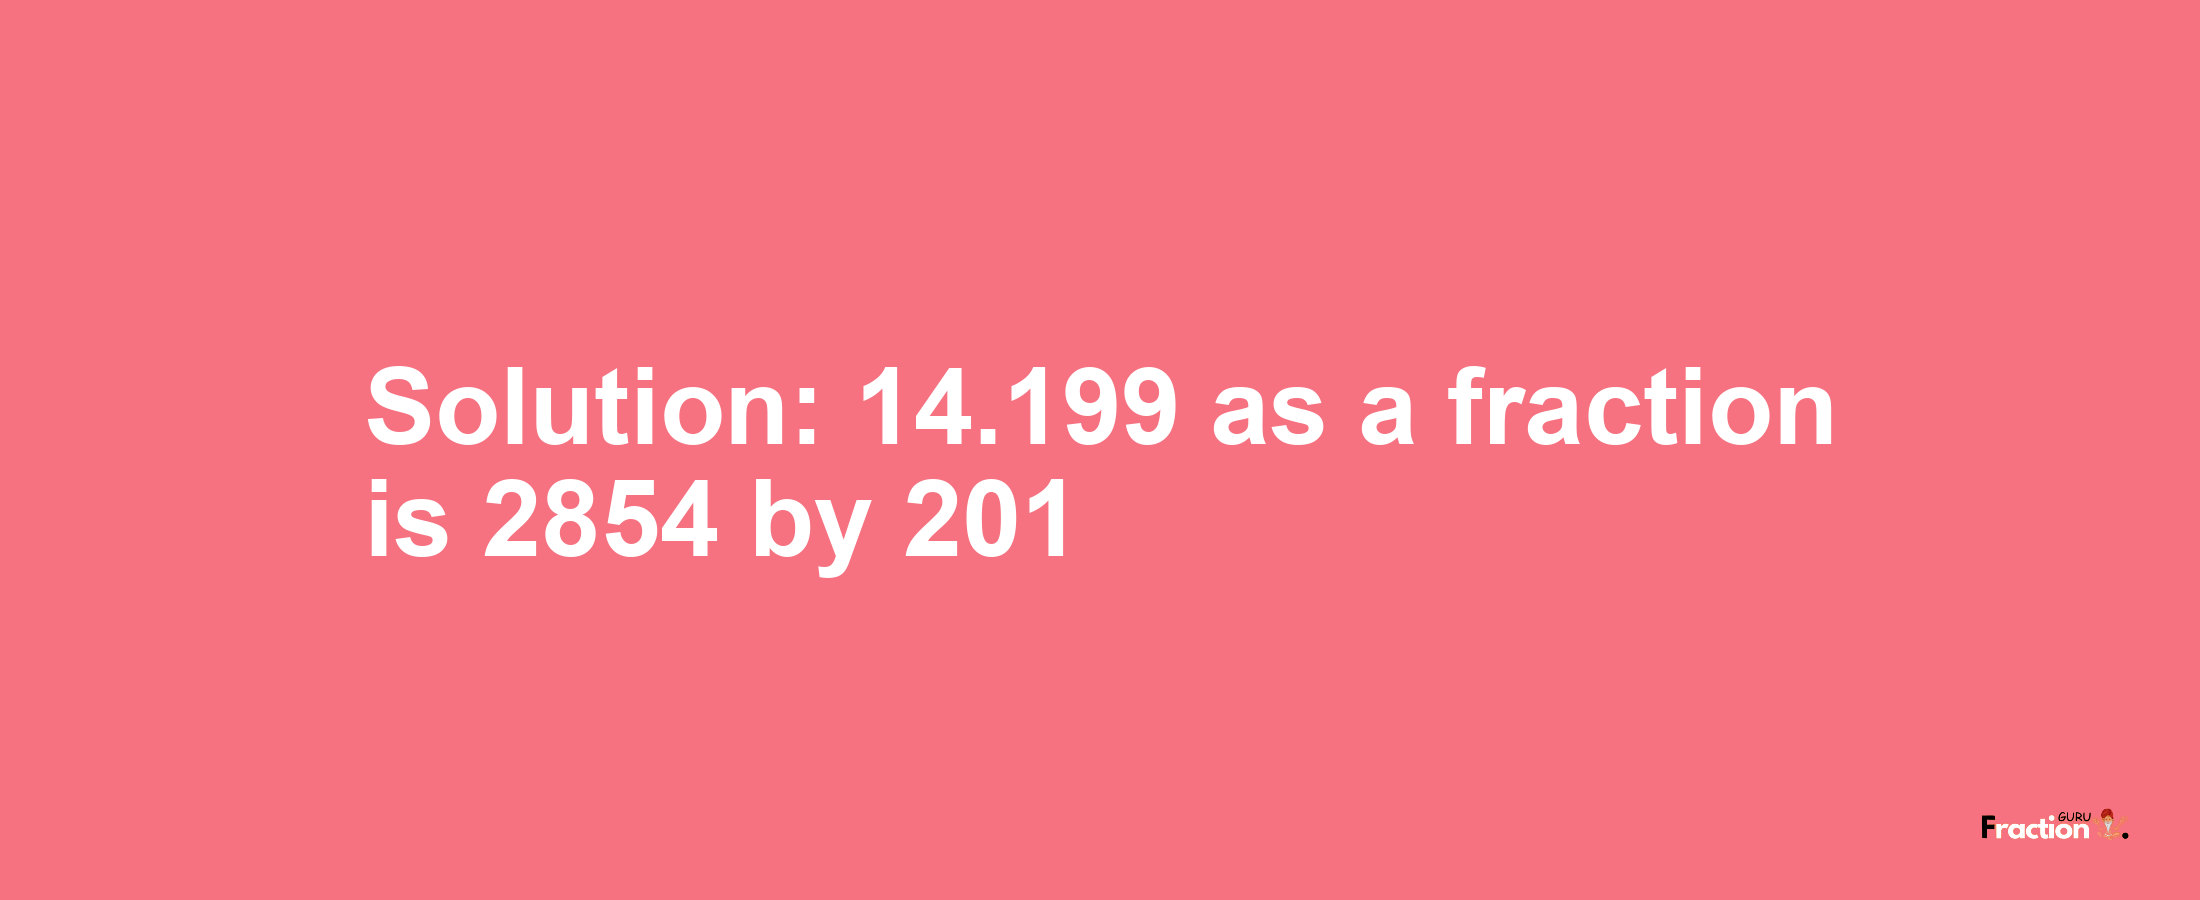 Solution:14.199 as a fraction is 2854/201